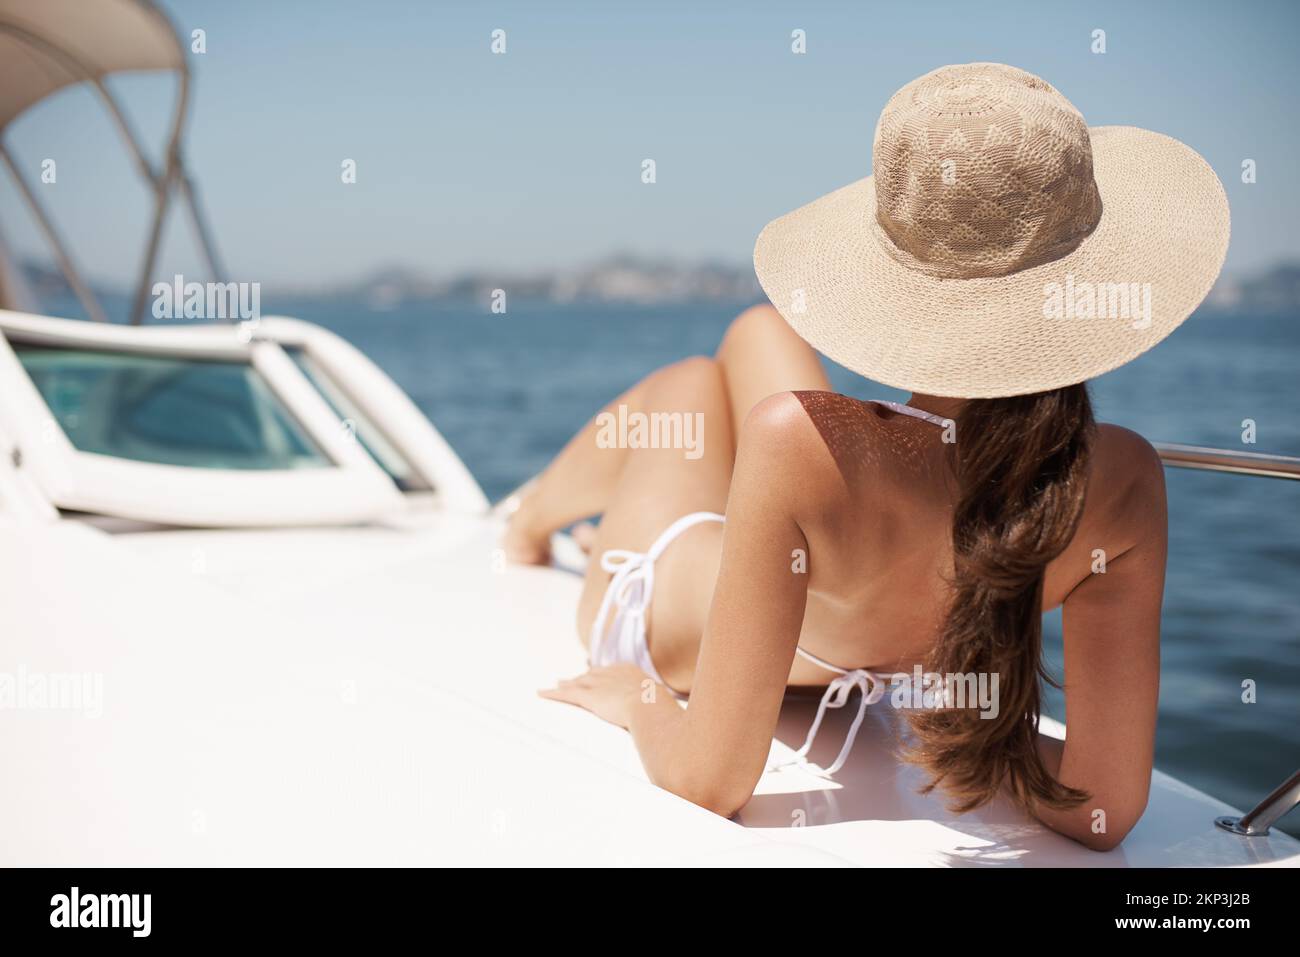 Lifestyles of the rich and the famous. An attractive young woman tanning on the deck of a luxury yacht. Stock Photo